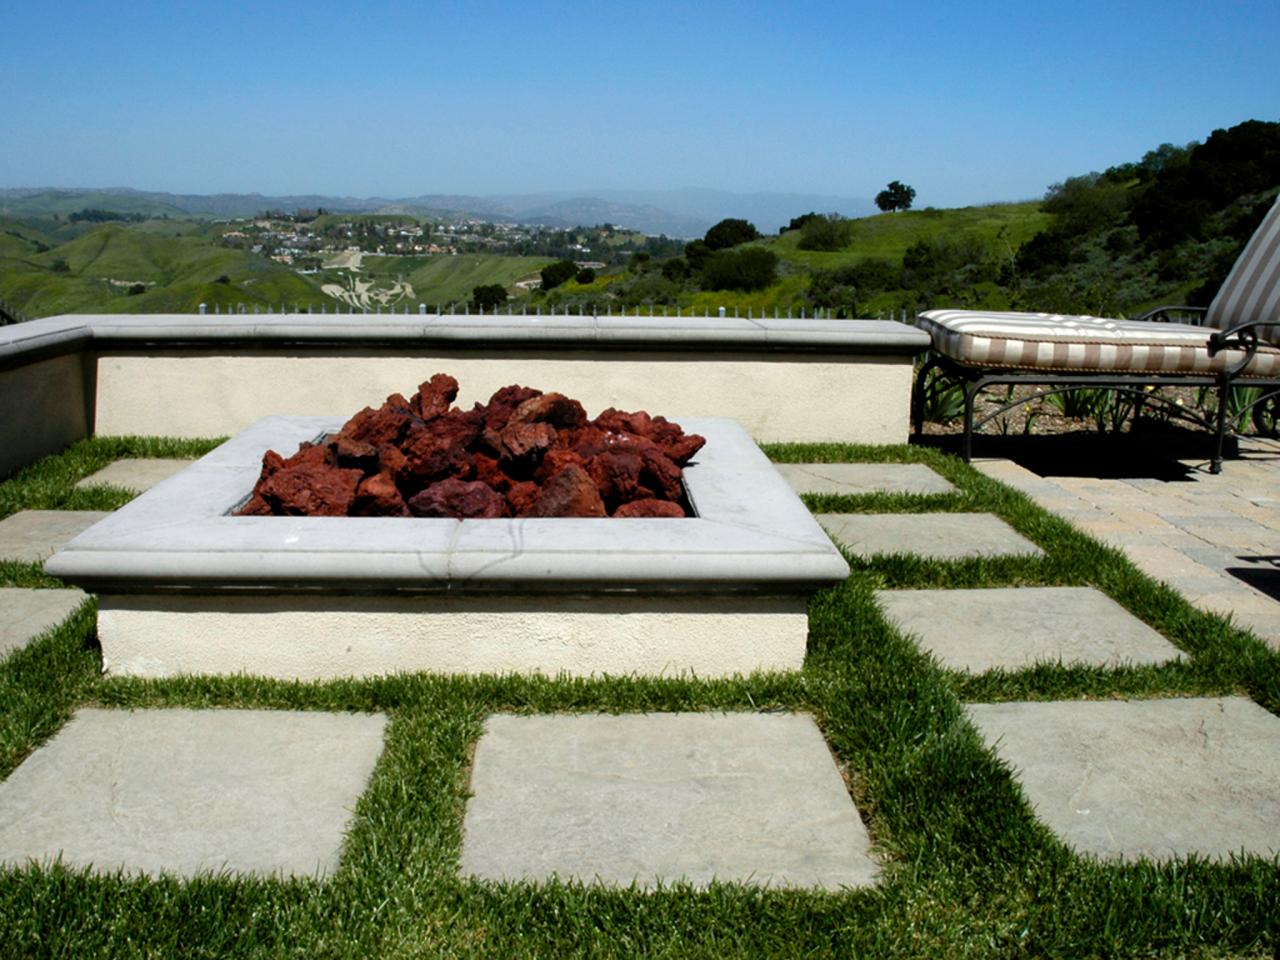 Square And Rectangular Fire Pits, Large Rectangular Fire Pit